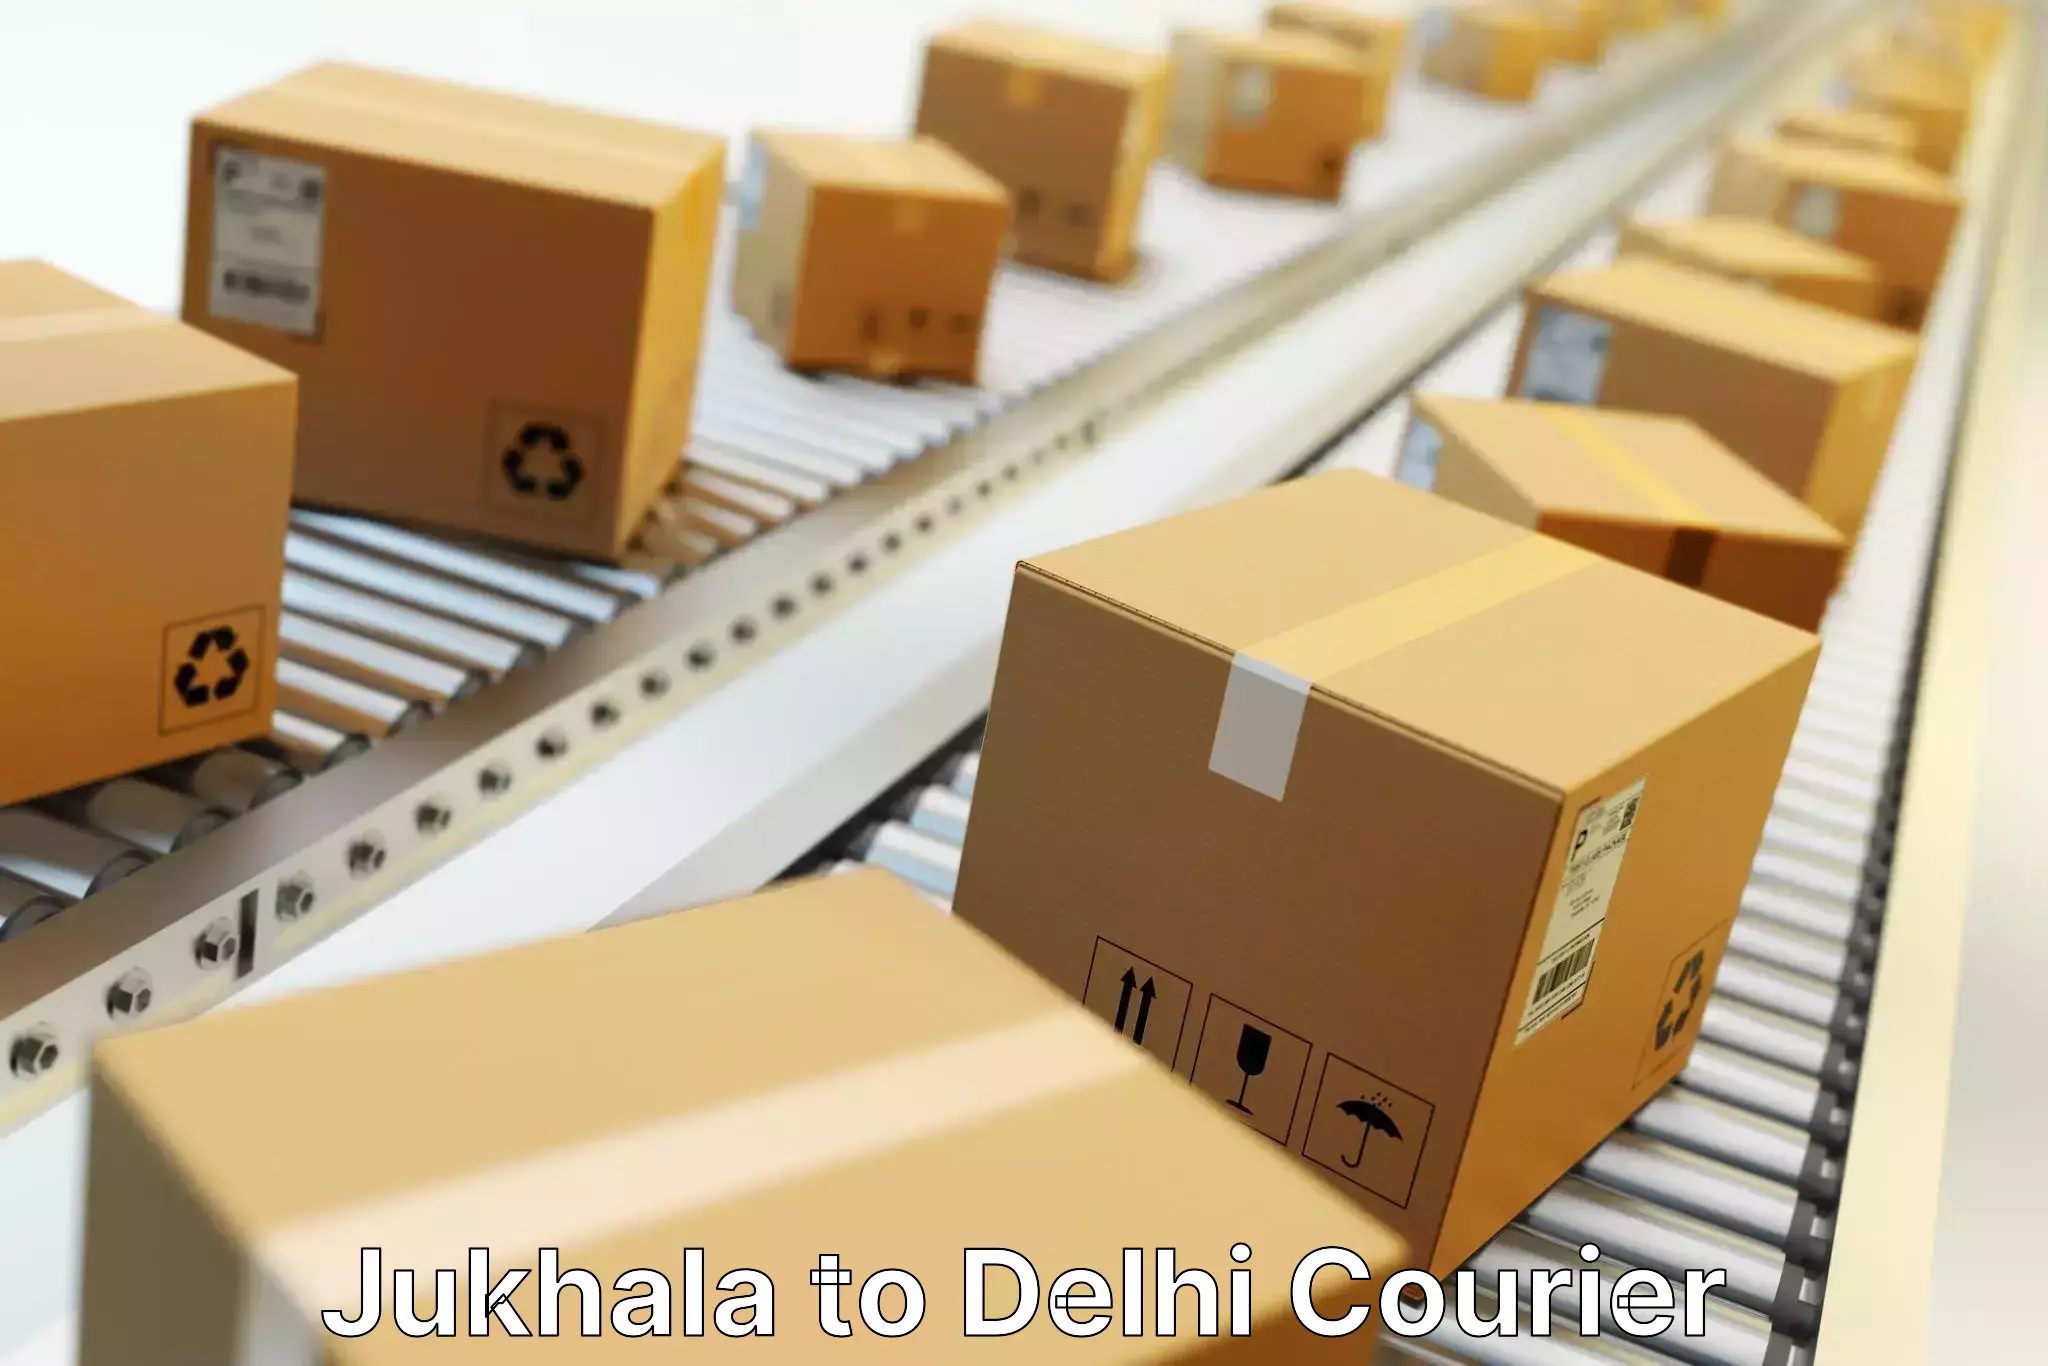 Same-day delivery options Jukhala to Delhi